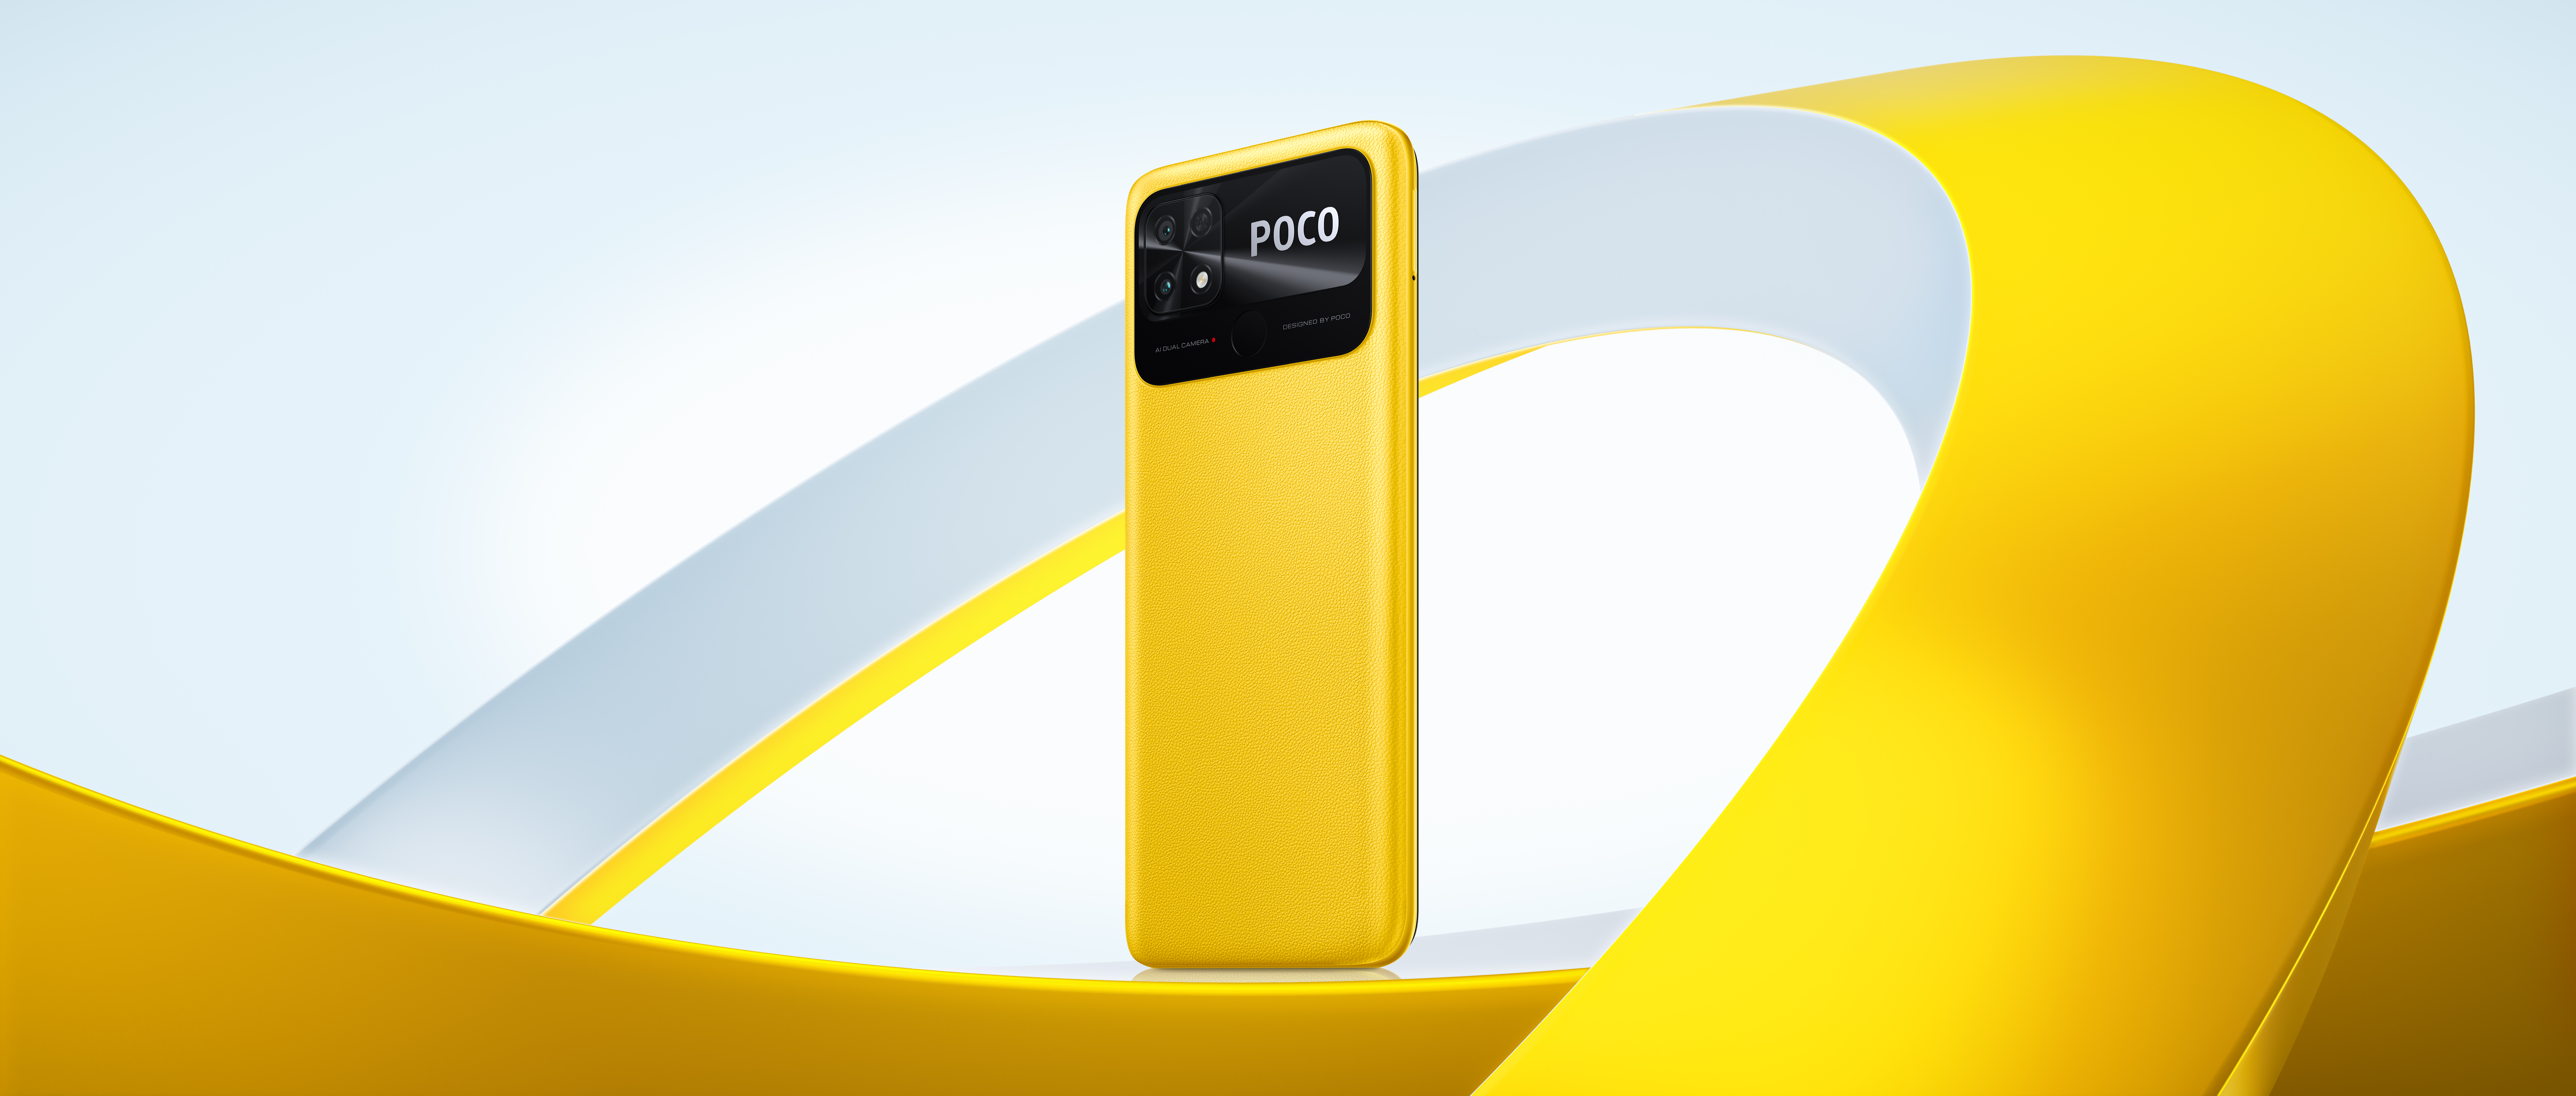 POCO's Latest Innovation for GEN-Z: Introducing the POCO X5 Pro 5G